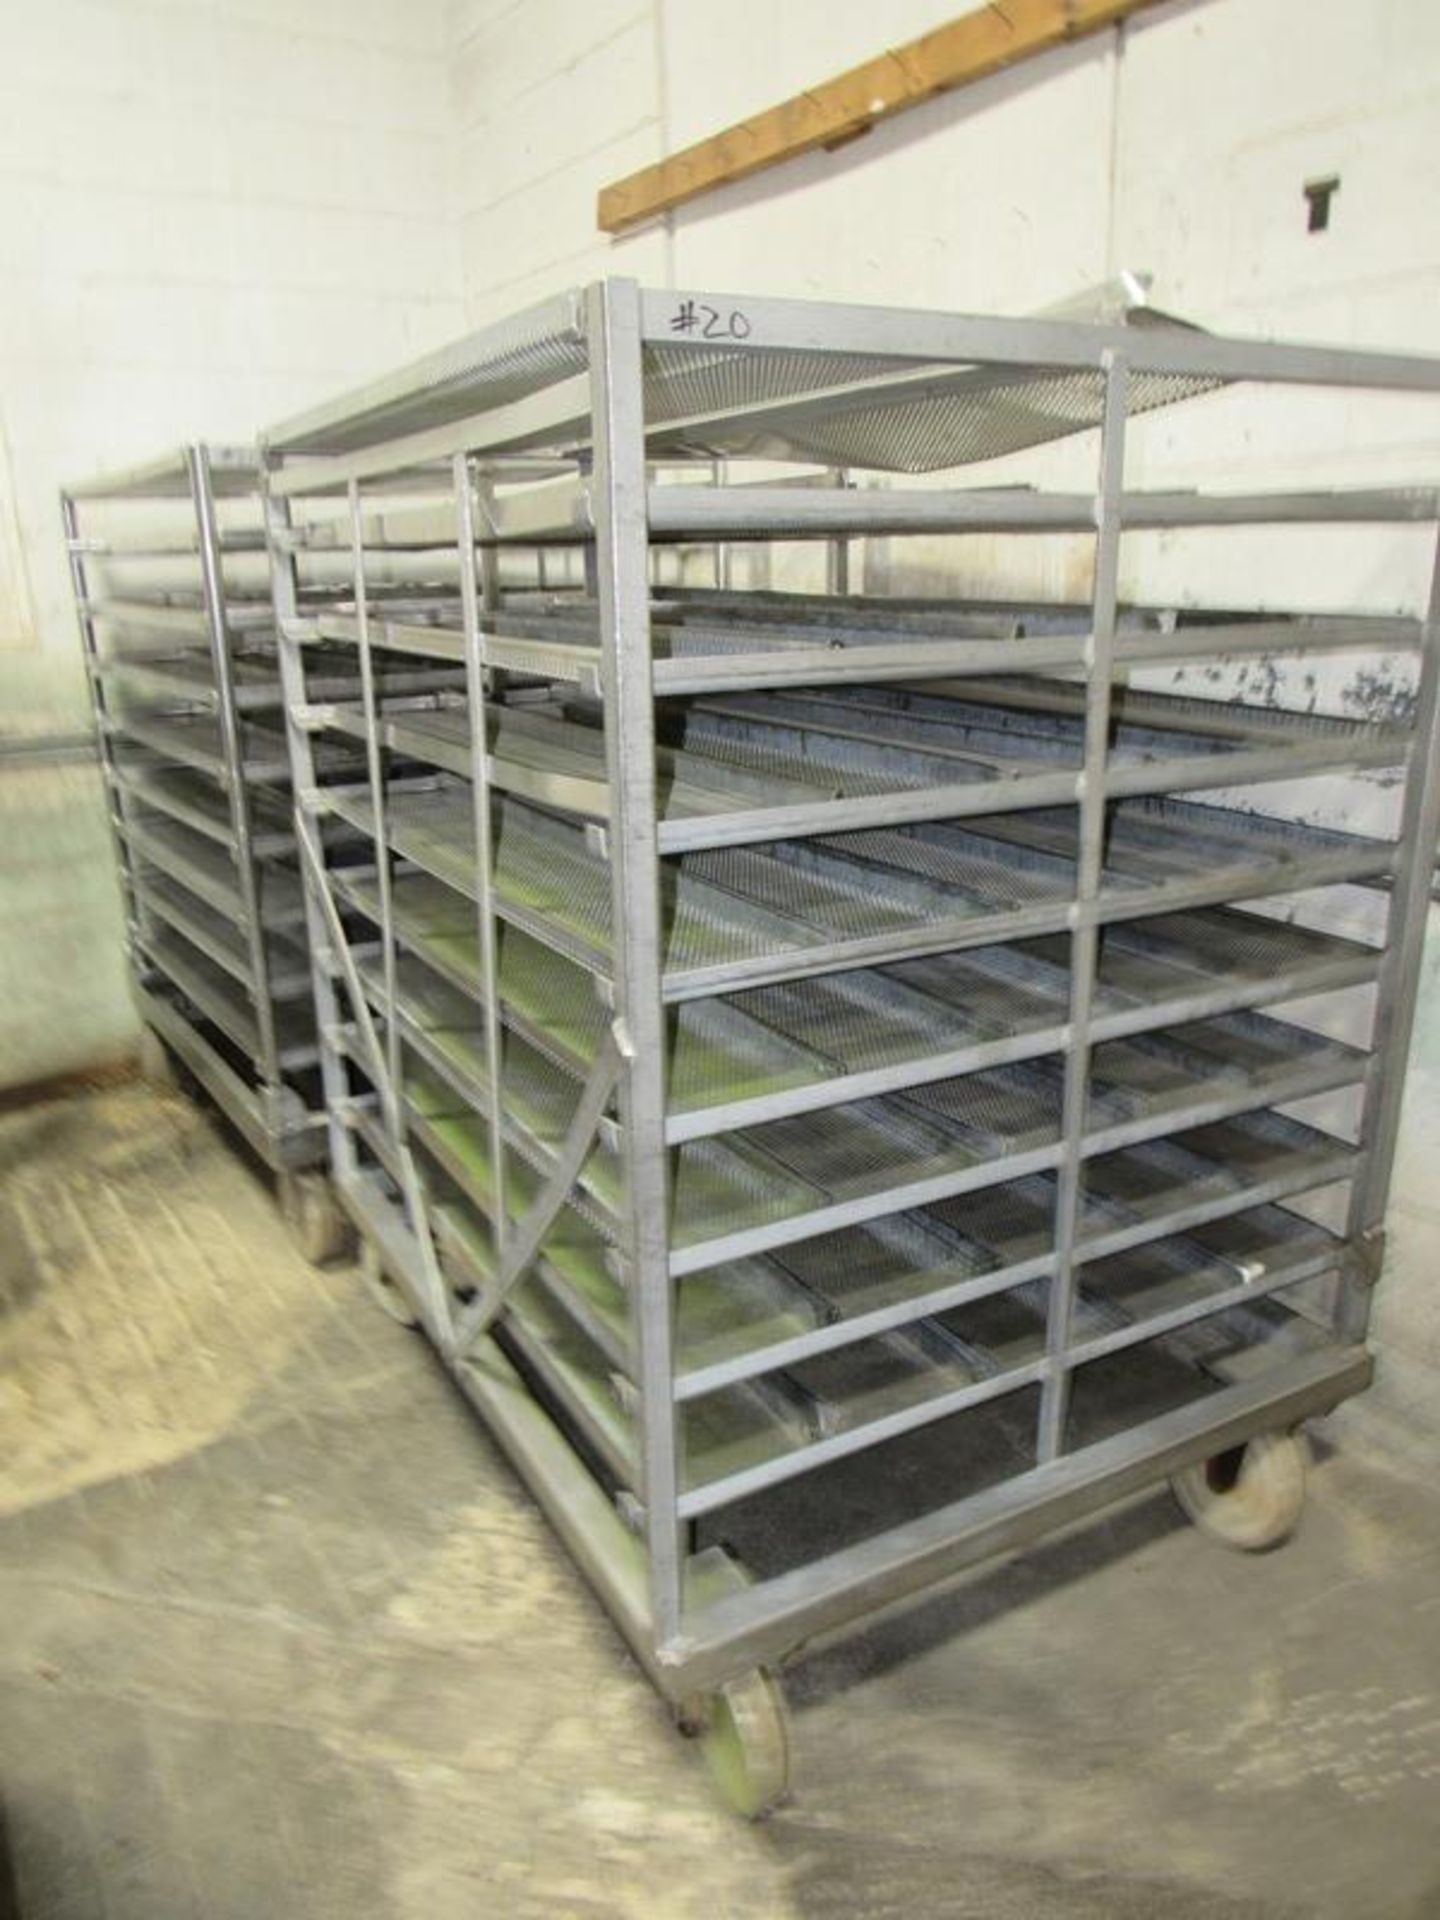 Portable Stainless Steel Carts, 43" W X 52" L X 5' T, 34 removable perforated trays, 8" W X 48" L, - Image 4 of 5